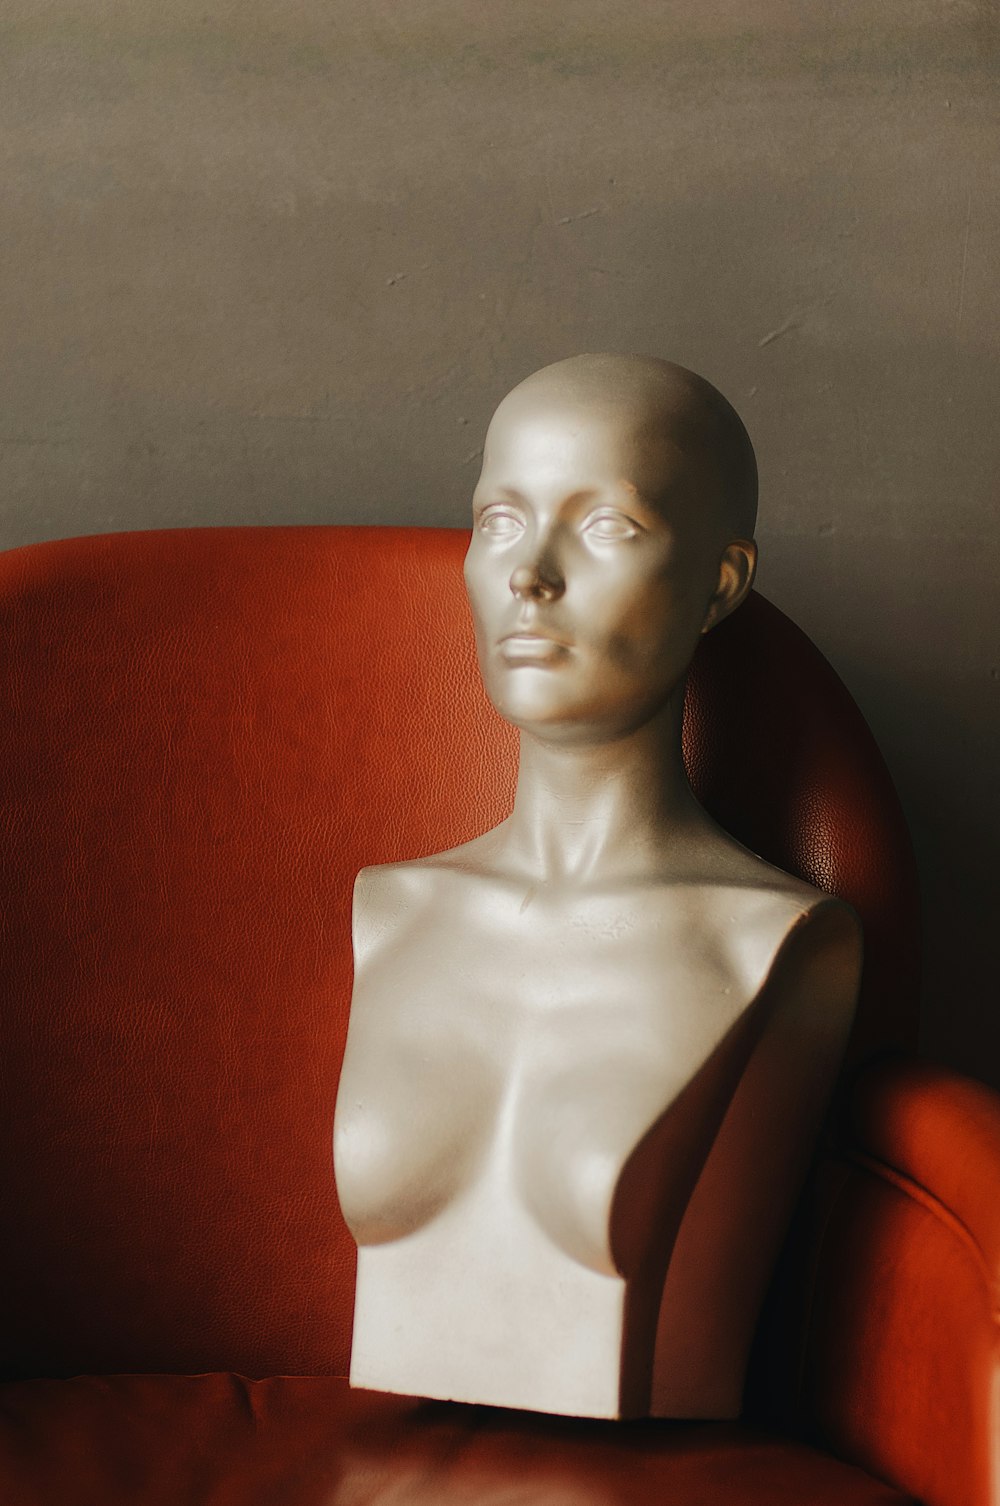 half-body mannequin on red leather chair